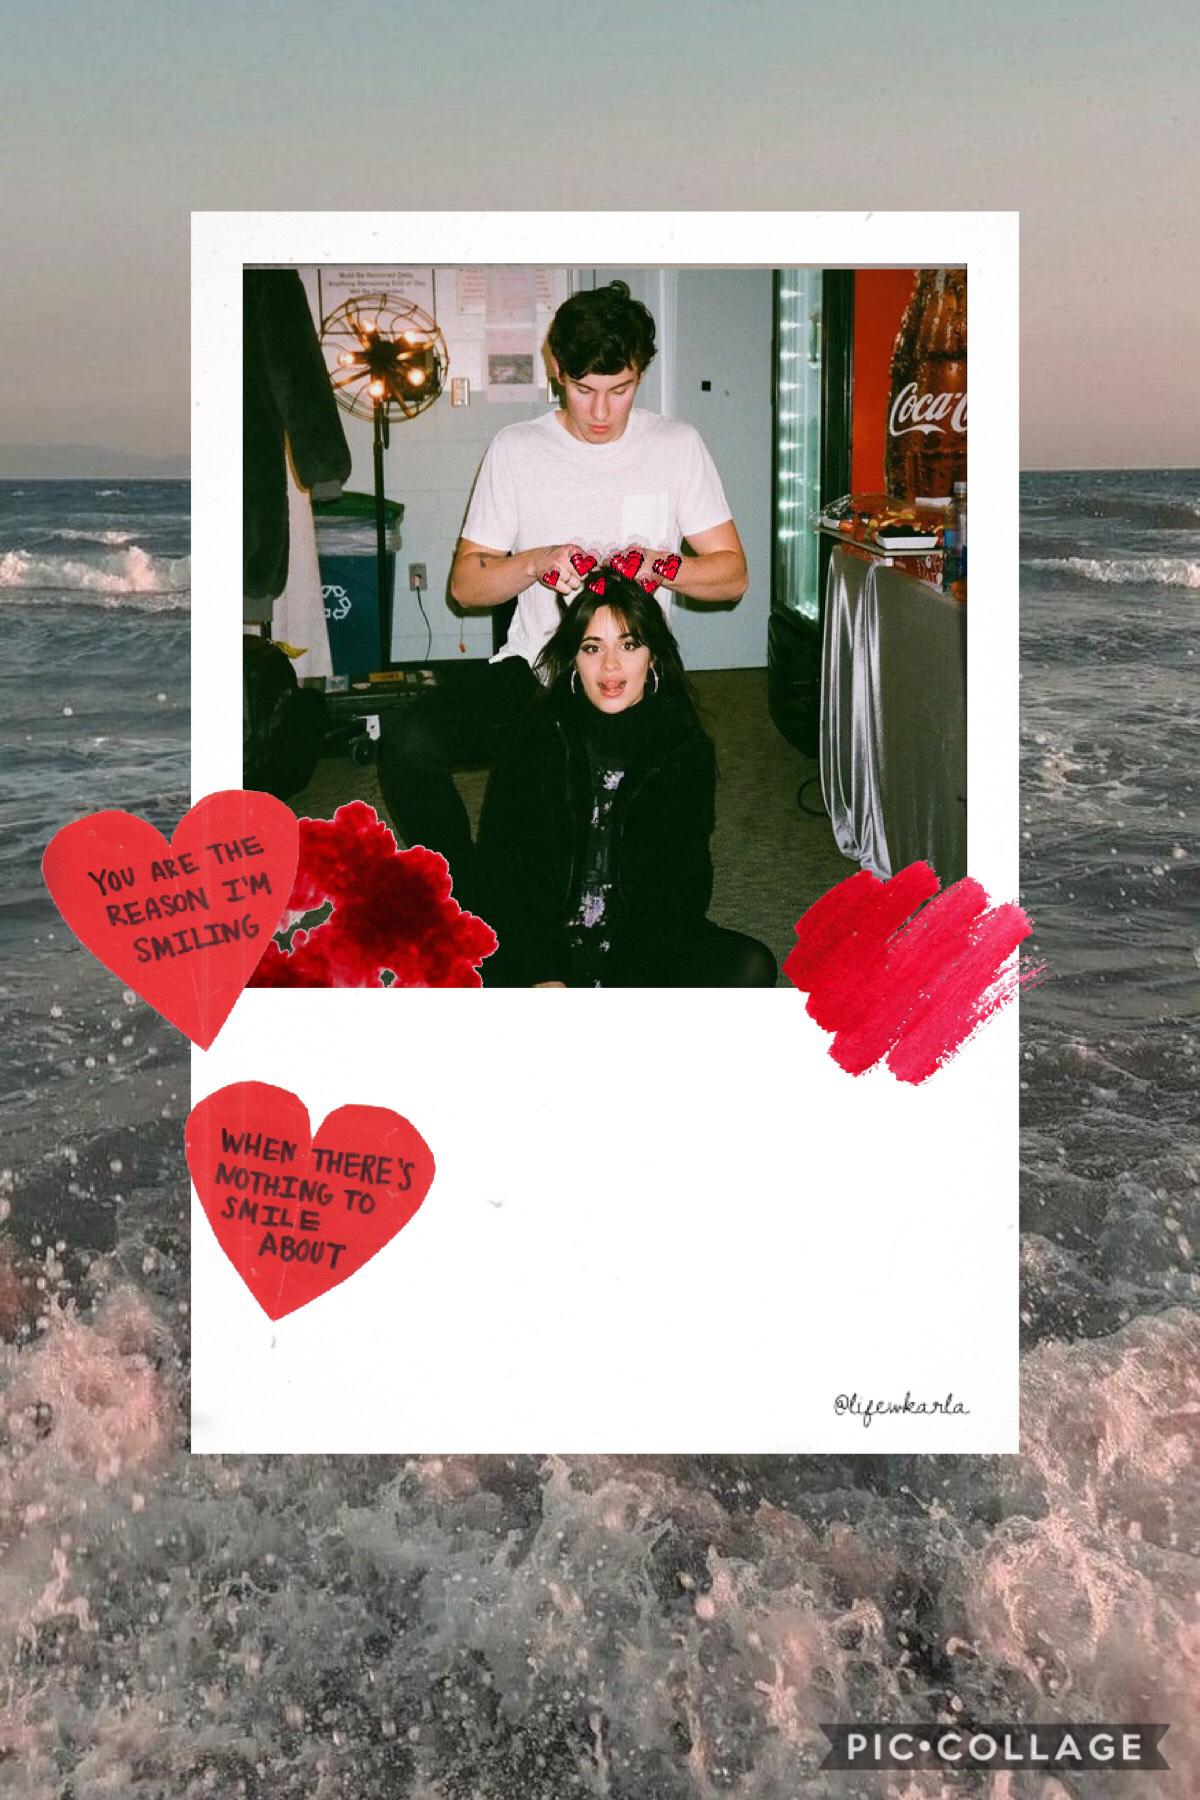 Camila x Shawn 
Do you ship them? 
Been thinking of practicing some digital art hehe!! Also trying to collab soon so HMU!!

Q: where r you from? 
